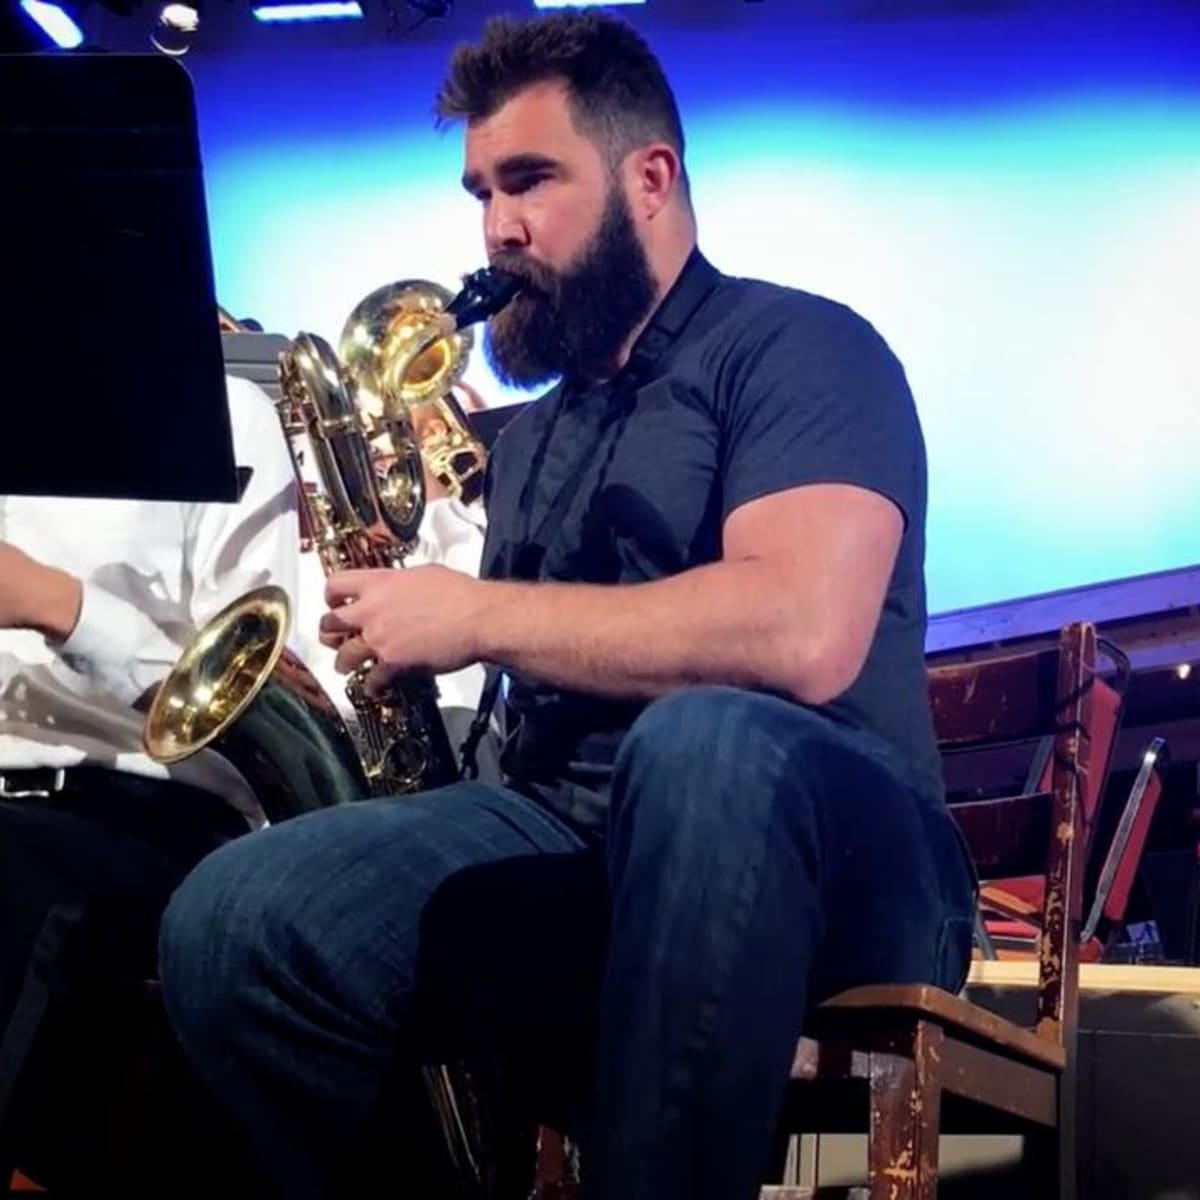 Jason Kelce is going to play the saxophone in his parade outfit